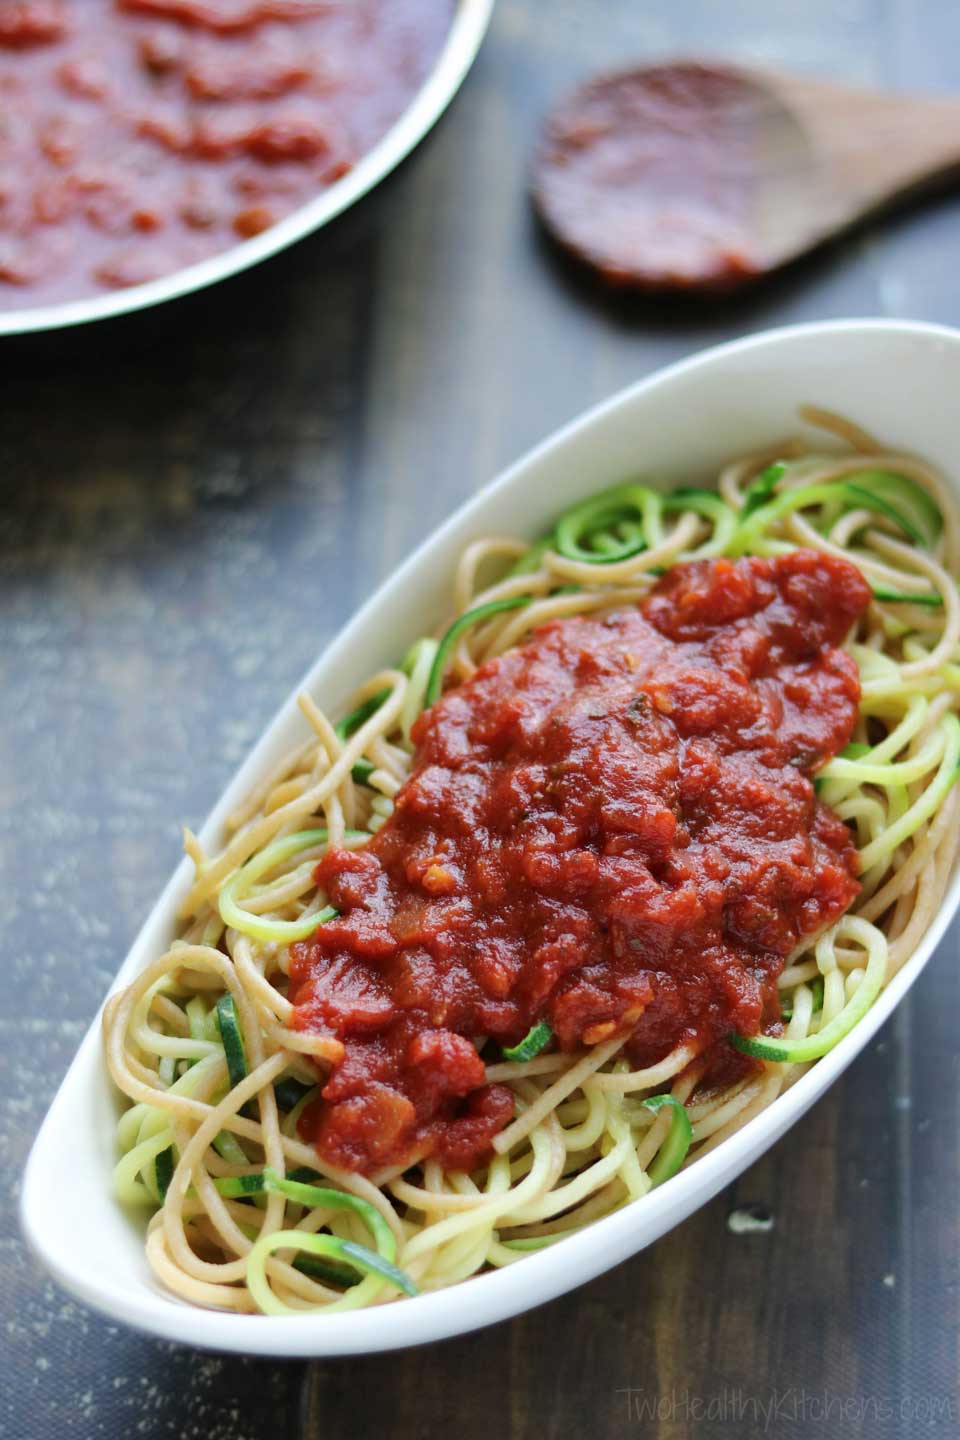 This zoodles recipe should work beautifully with pretty much any sauce you typically use with regular-old spaghetti. Here we’ve topped it with a simple marinara, but feel free to get creative!